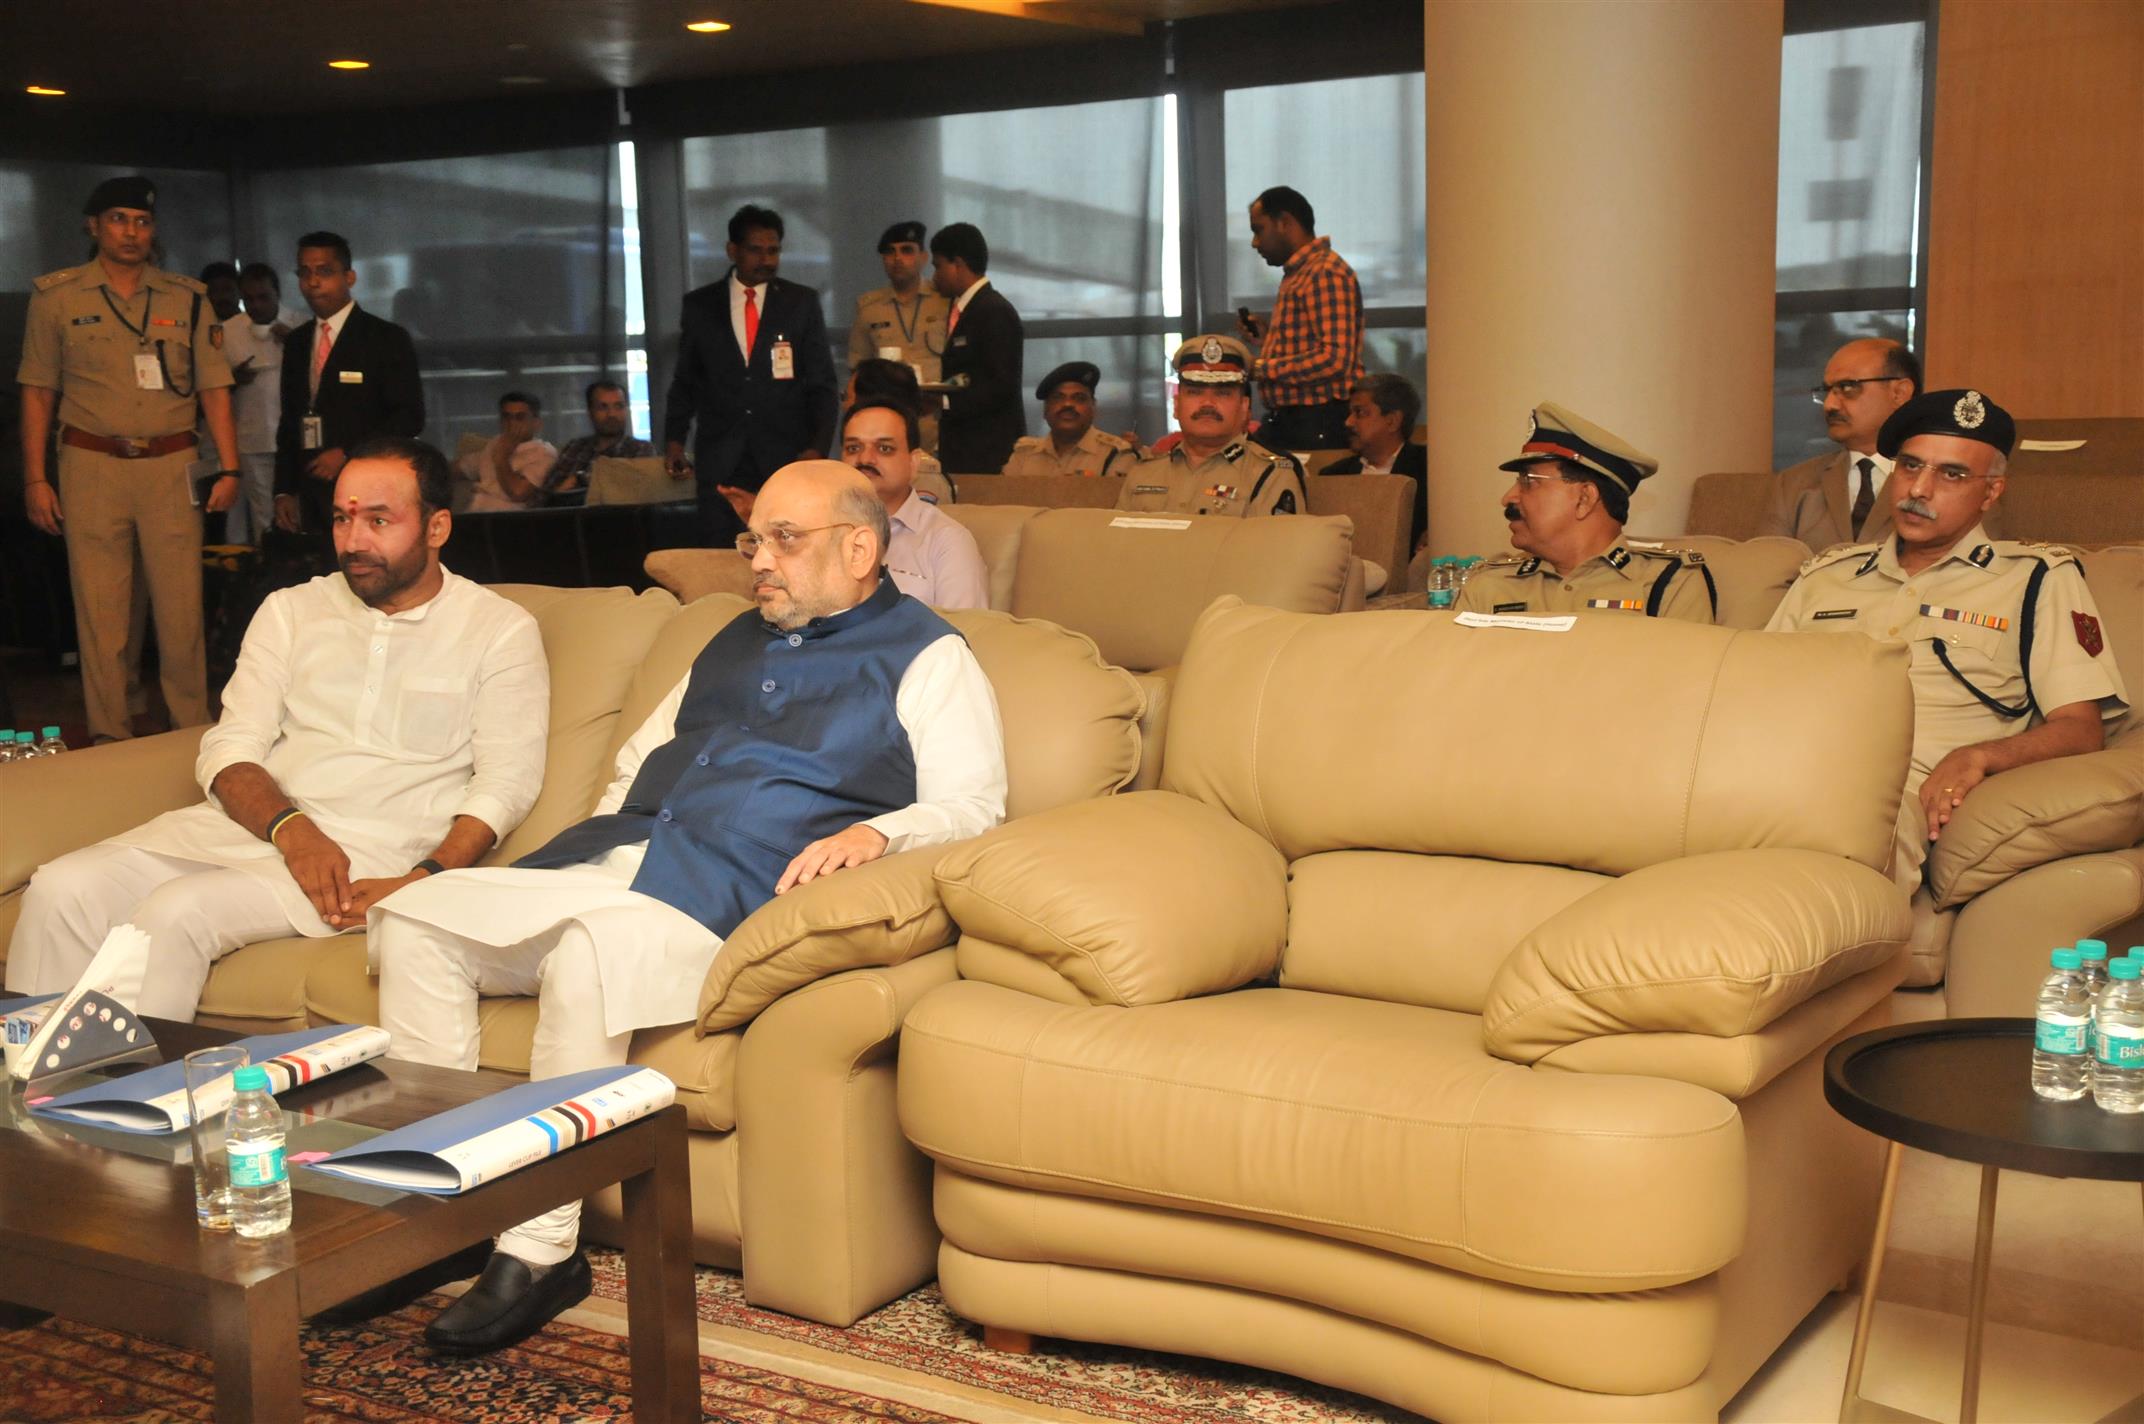 The Union Home Minister, Shri Amit Shah interacting with CISF officials at RGI Airport in Hyderabad on July 06, 2019. The Minister of State for Home Affairs, Shri G. Kishan Reddy and CISF officals are also seen 